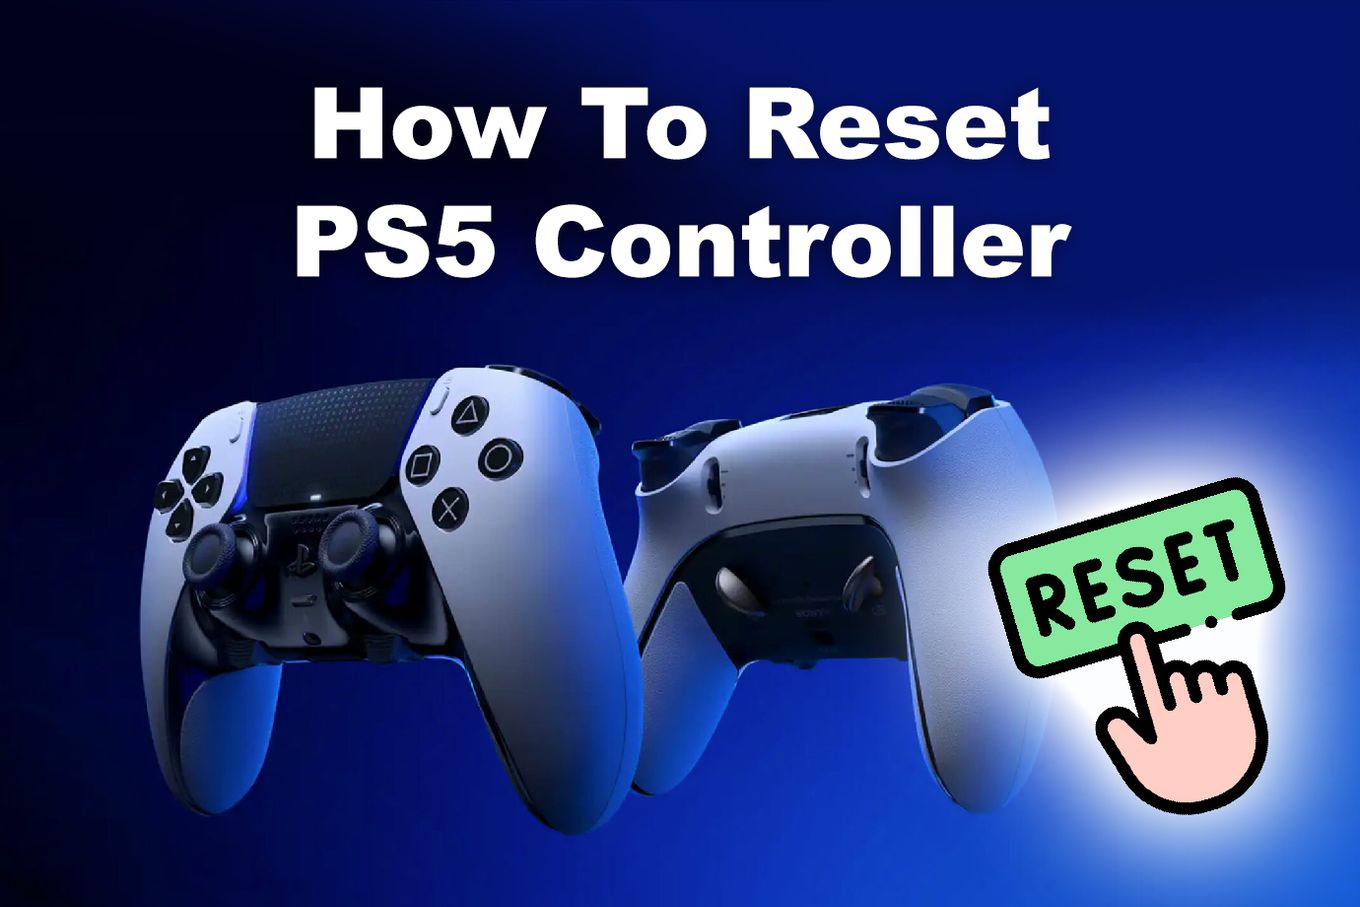 How To Reset PS5 Controller